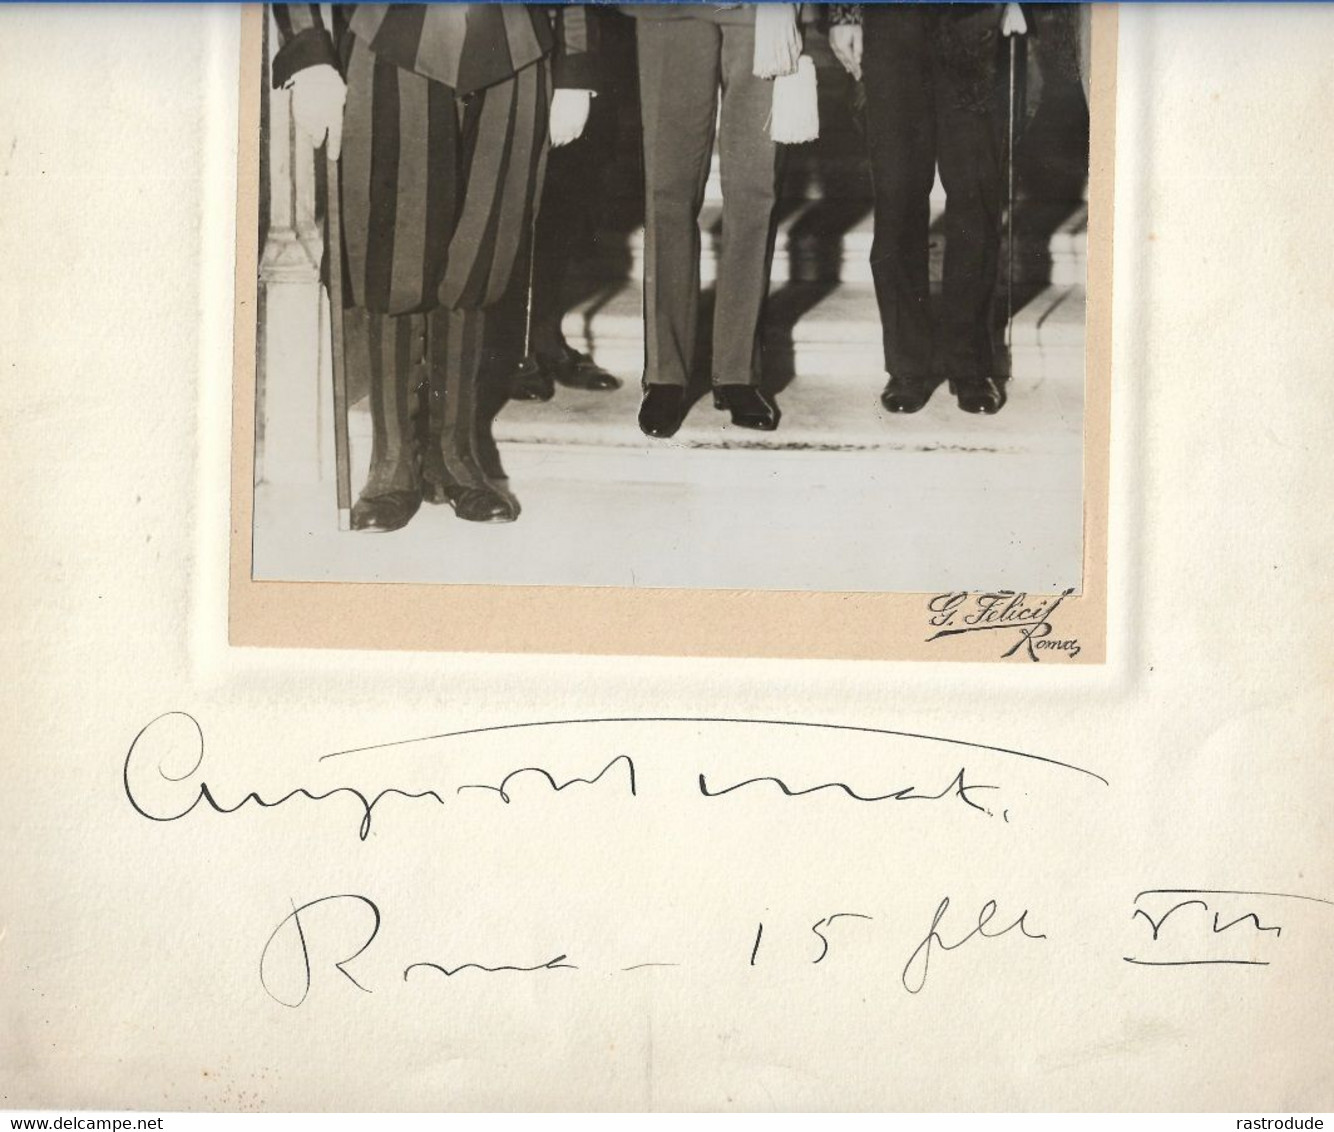 1930s ORIGINAL PHOTOGRAPH Of AUGUSTO TURATI In The VATICAN W. SWISS GUARD By GIUSEPPE FELICI - SIGNED - Signiert